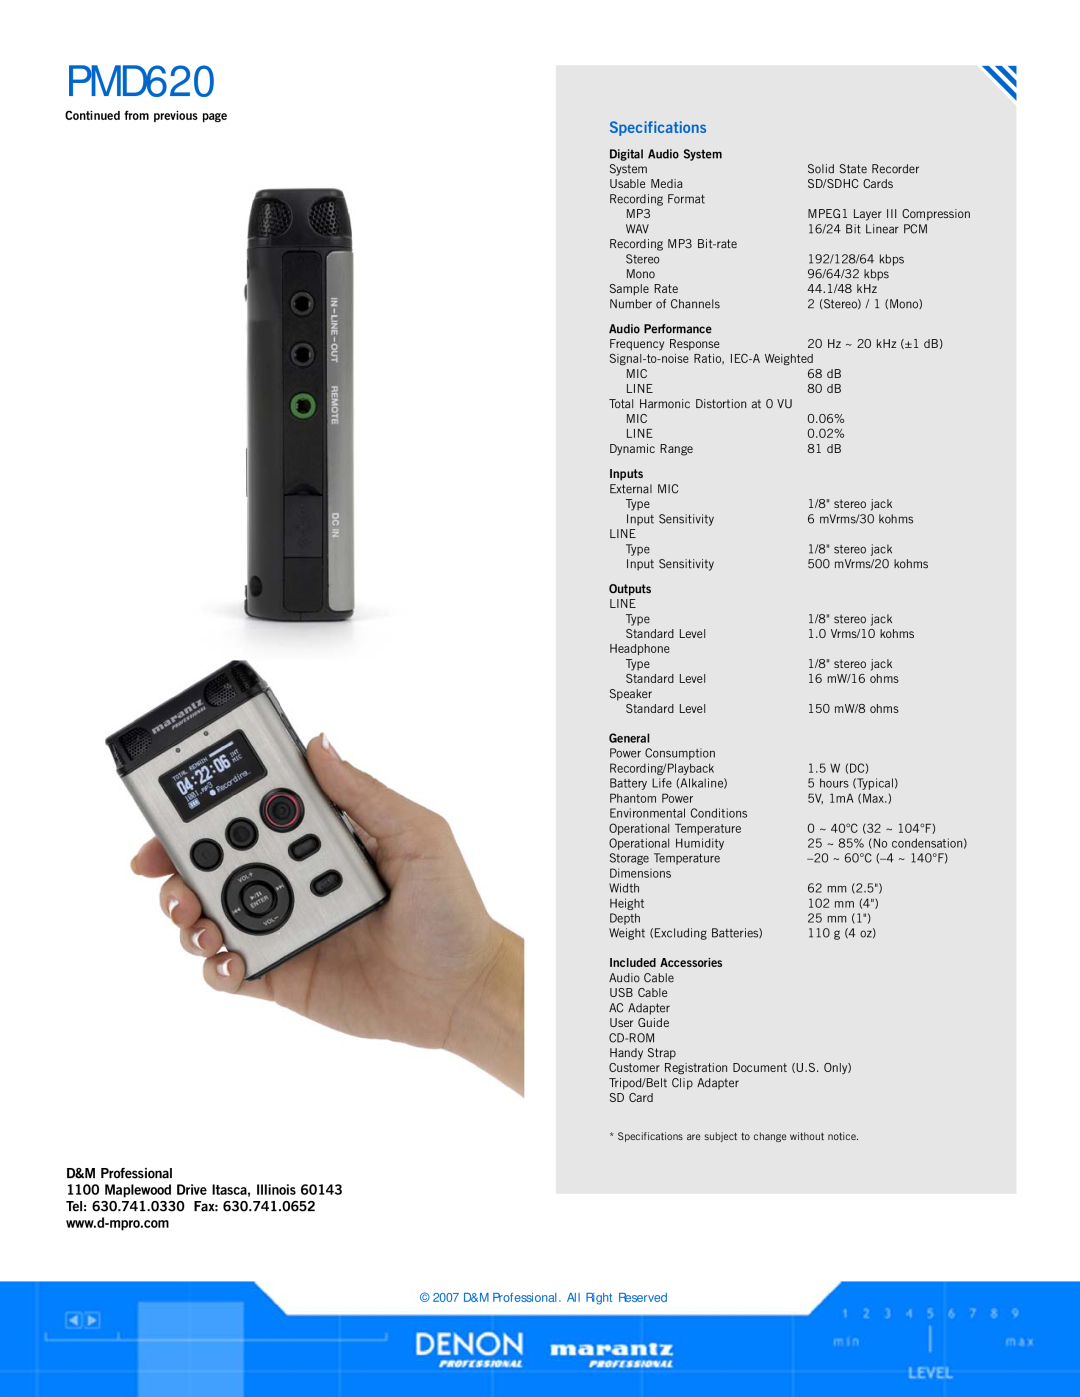 Marantz PMD620 D&M Professional, Specifications, Continued from previous page, Digital Audio System, Audio Performance 